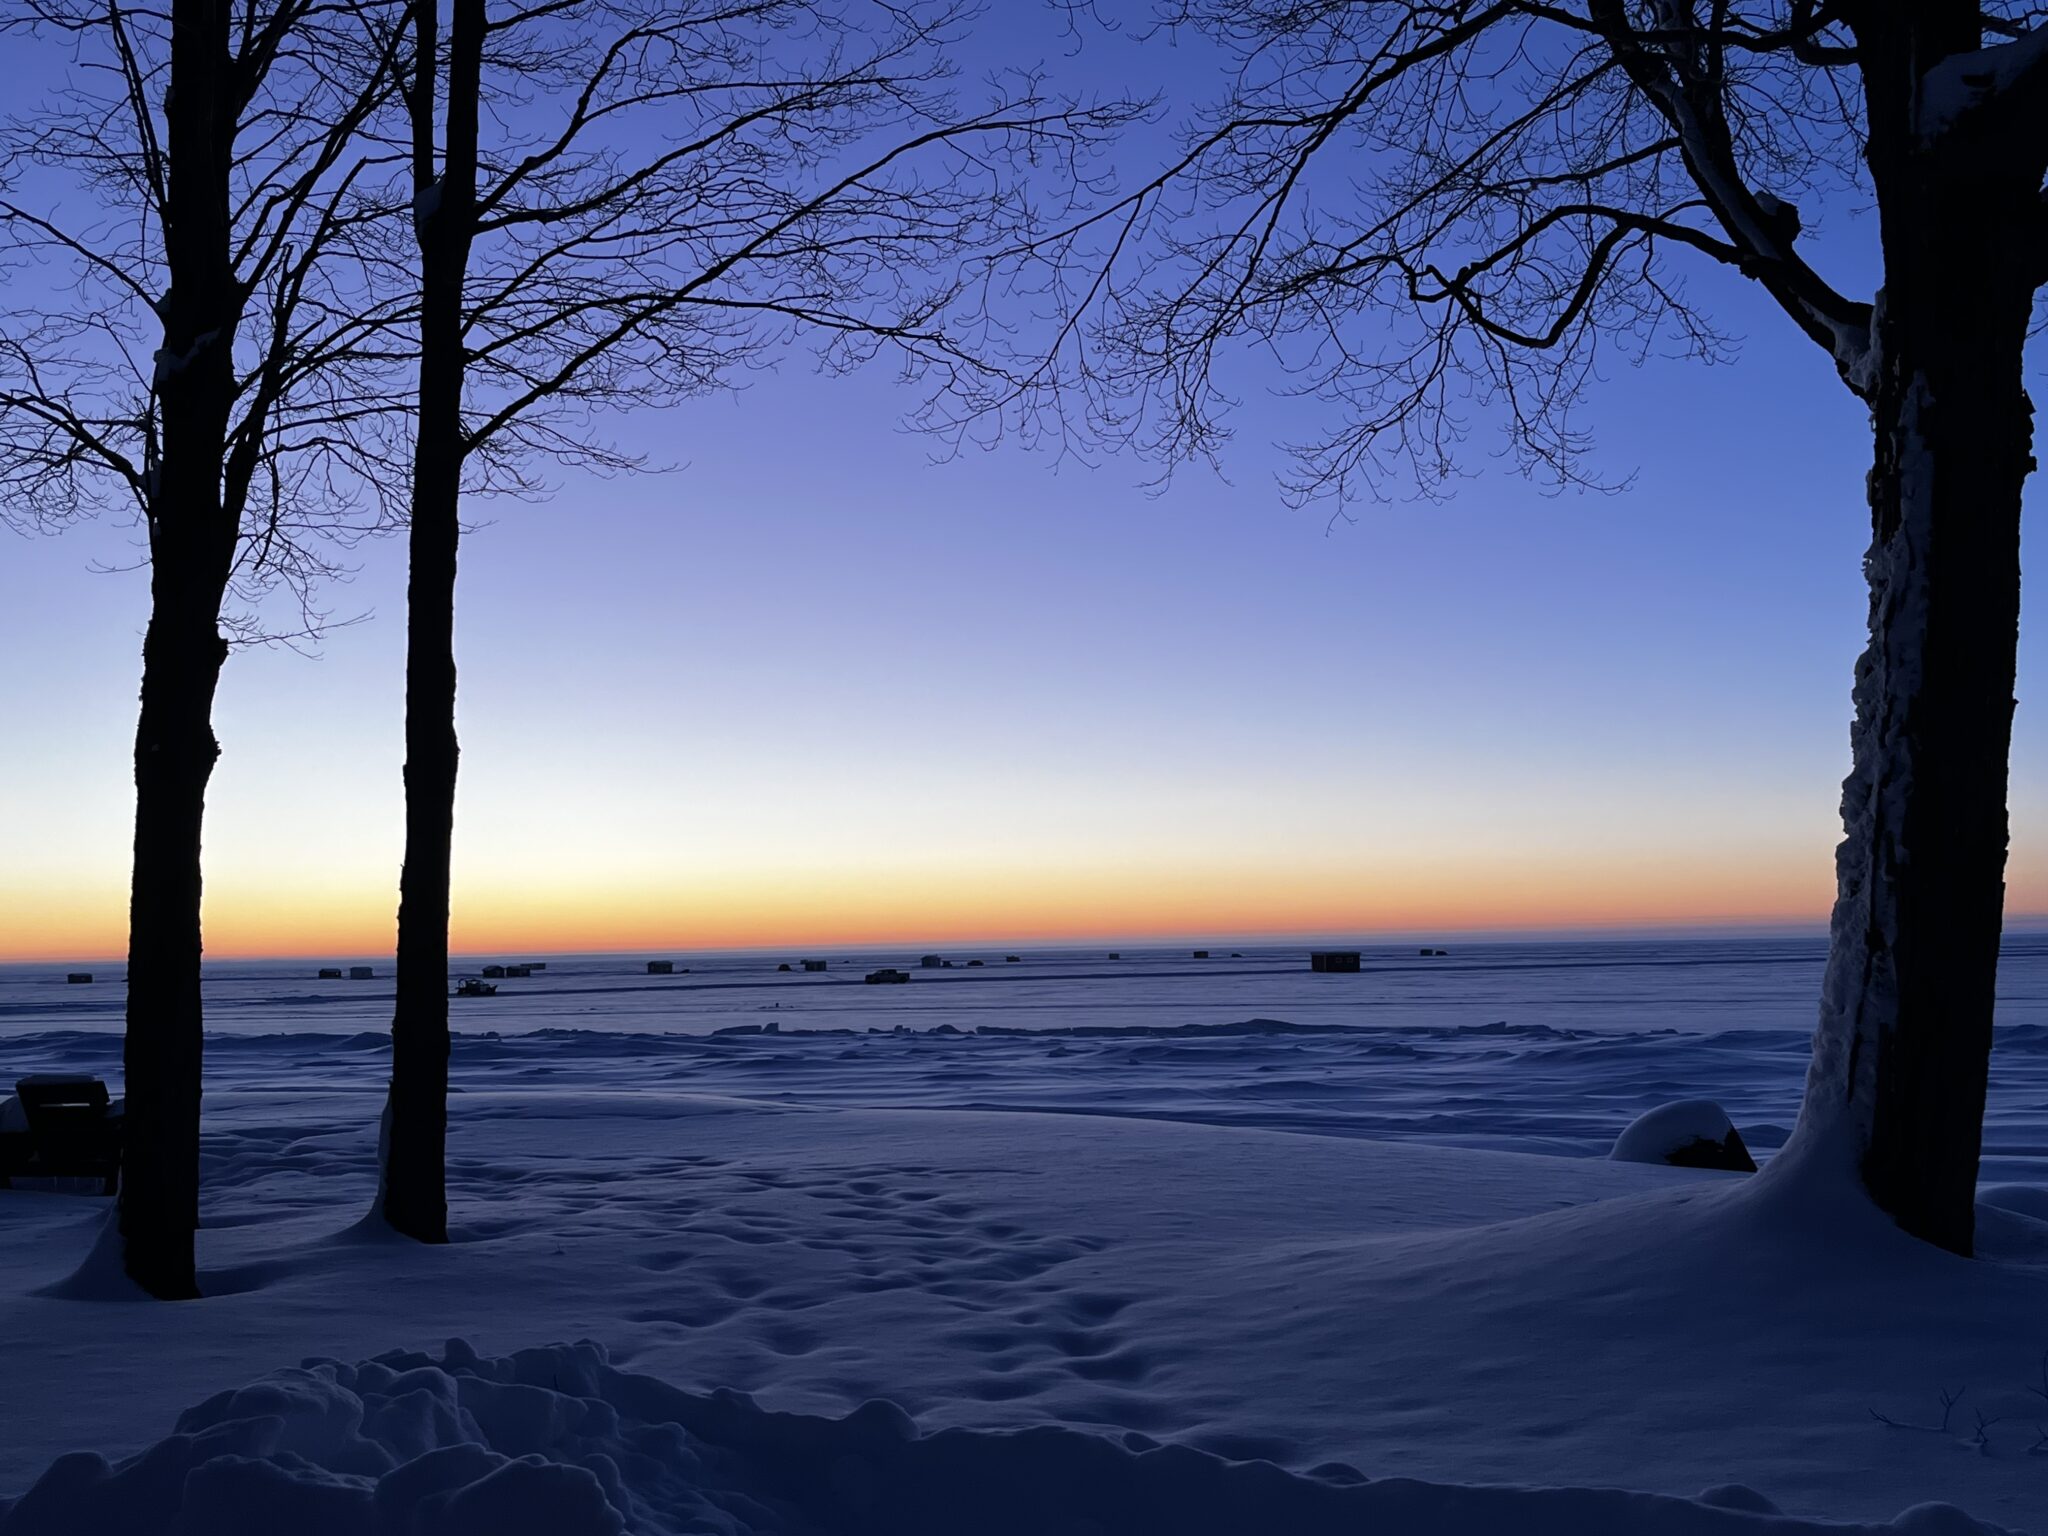 Sunrise on the north shore of Mille Lacs Lake